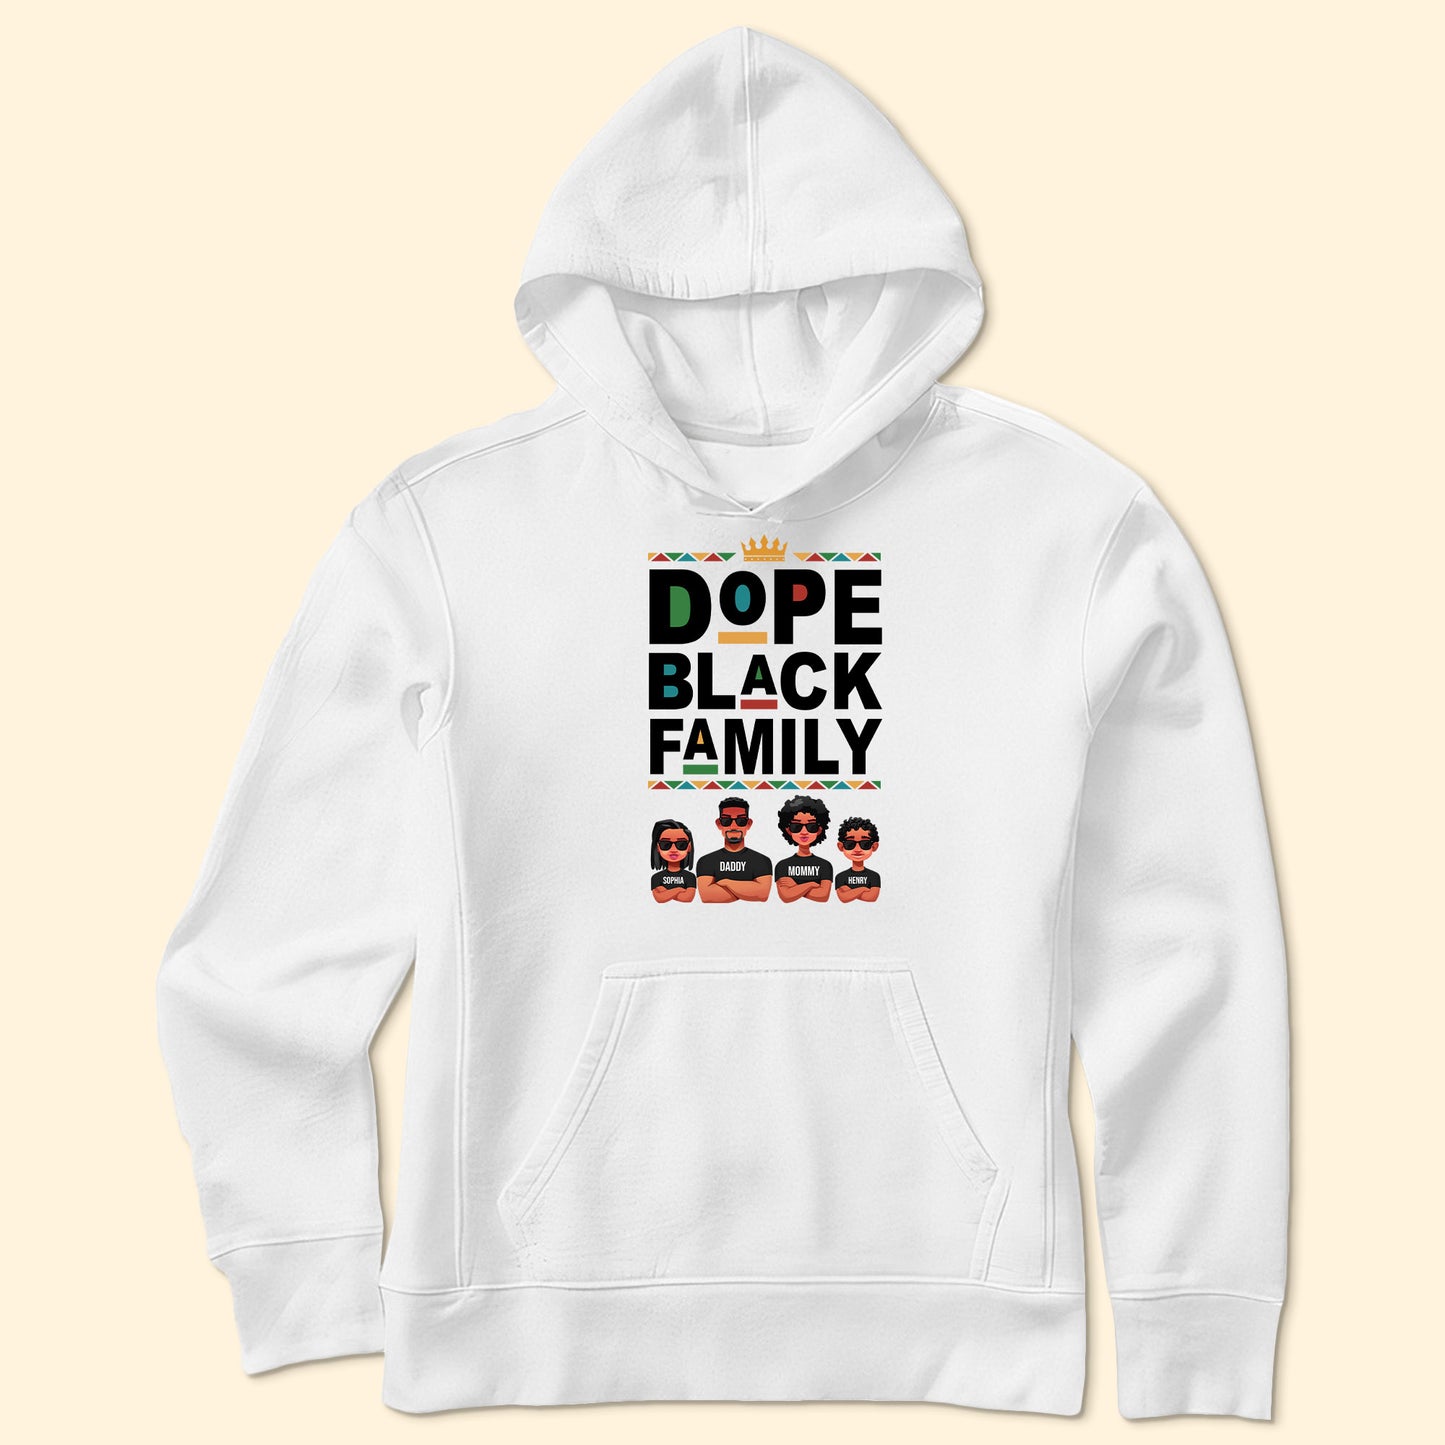 Dope Black Family - Personalized Shirt